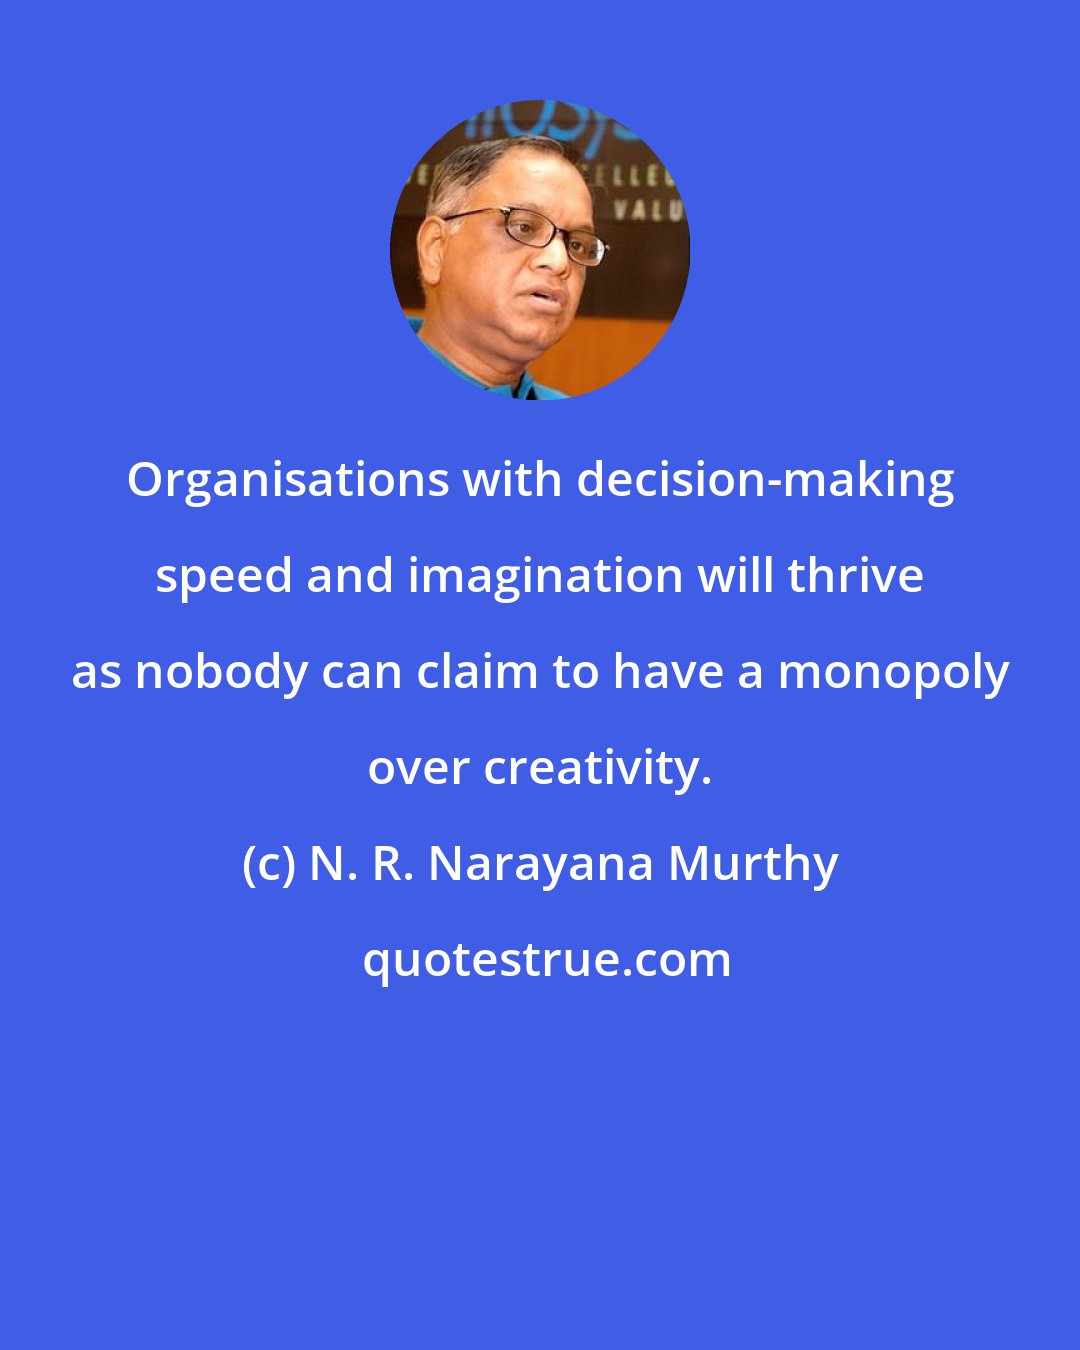 N. R. Narayana Murthy: Organisations with decision-making speed and imagination will thrive as nobody can claim to have a monopoly over creativity.